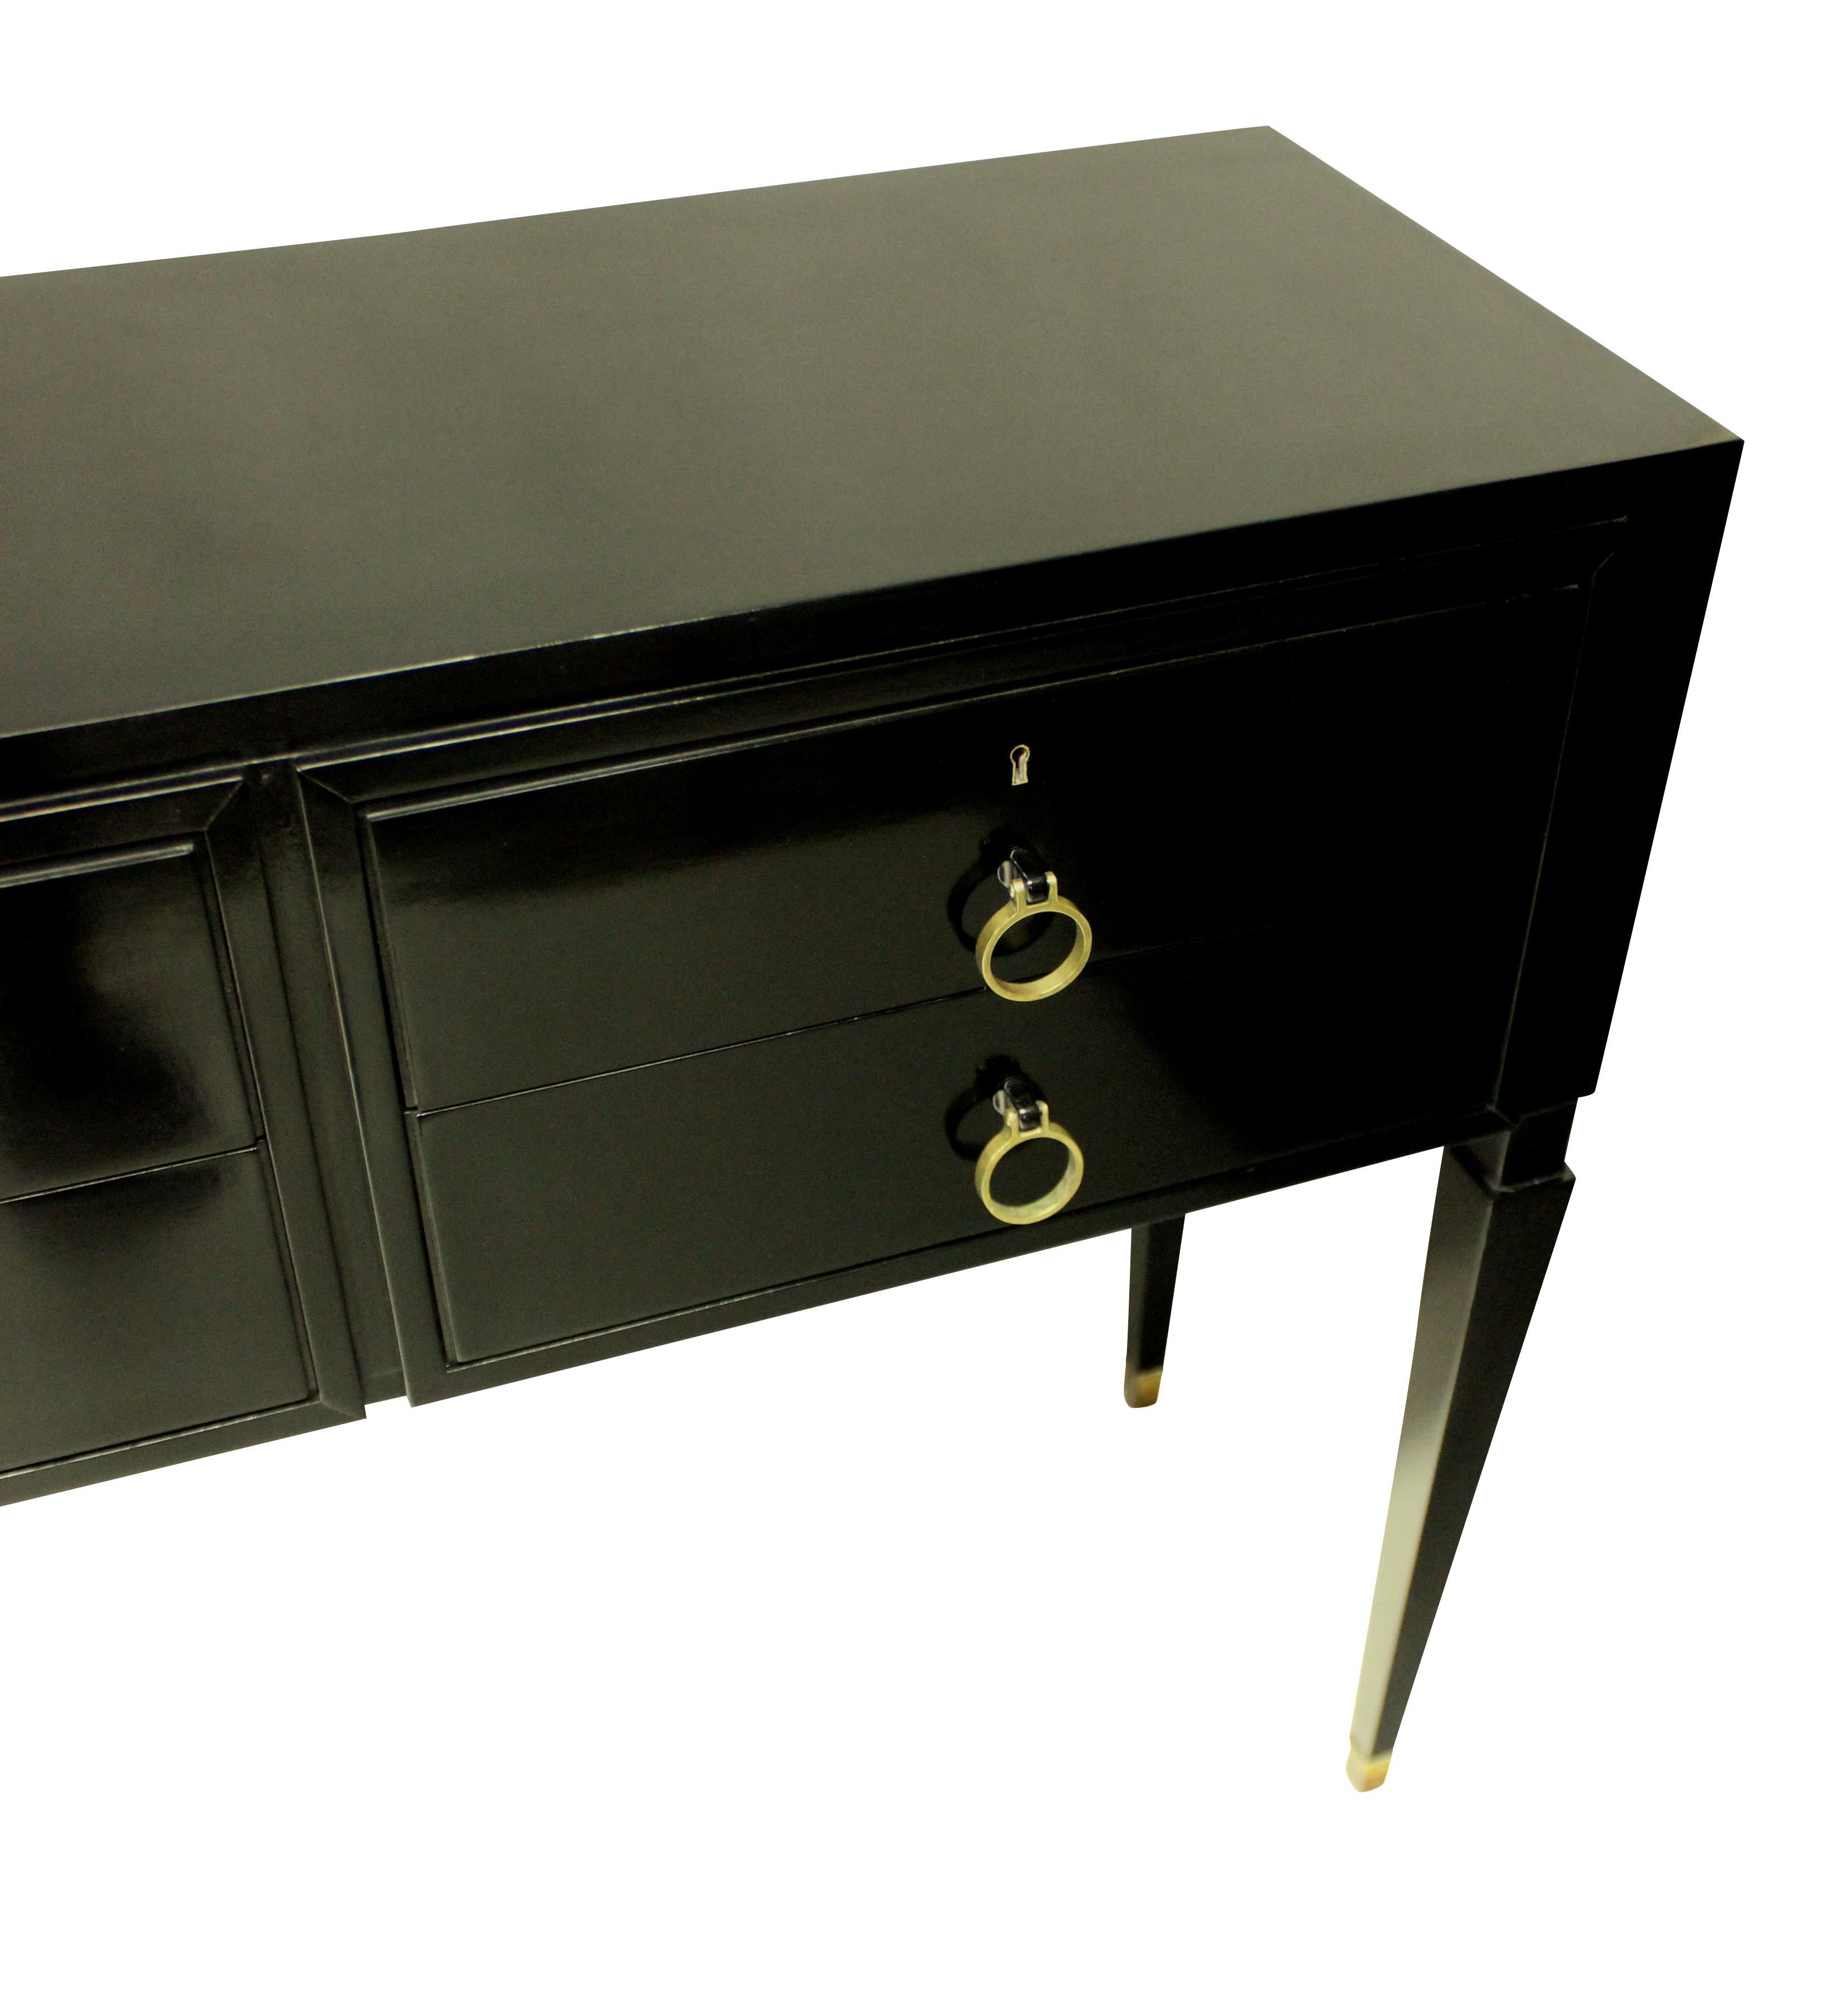 A large Italian black lacquered six drawer console table in the Neo-Classical taste, by Paolo Buffa. On slender tapering legs, with brass sabot and handles to each drawer.